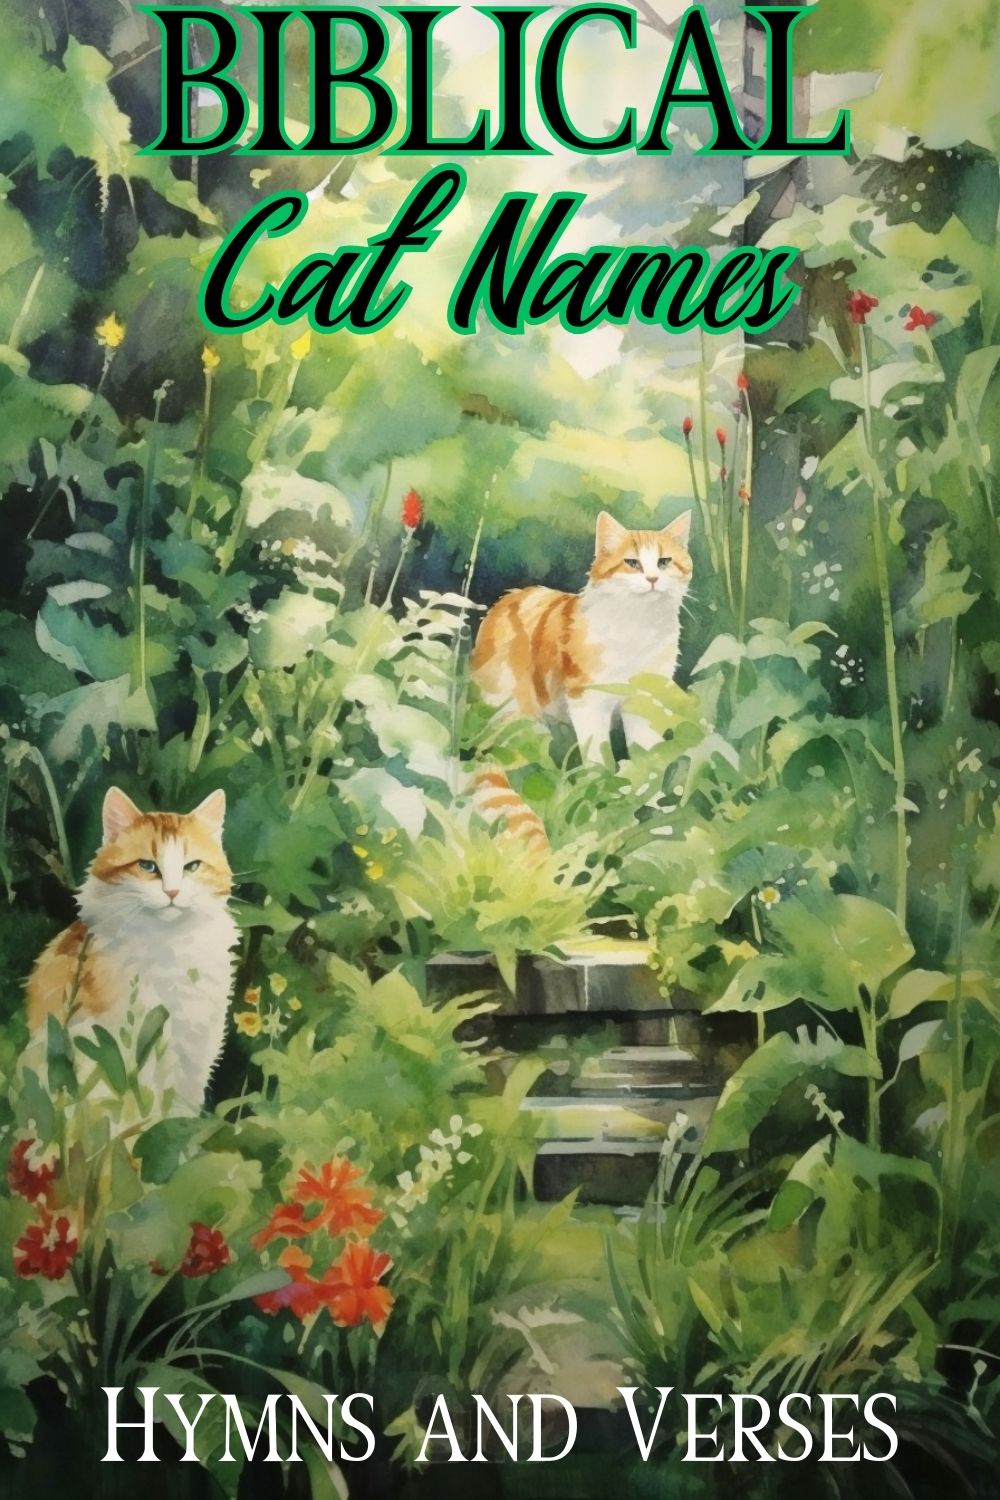 pinterest pin about biblical cat names with watercolor image of cats in a lush garden